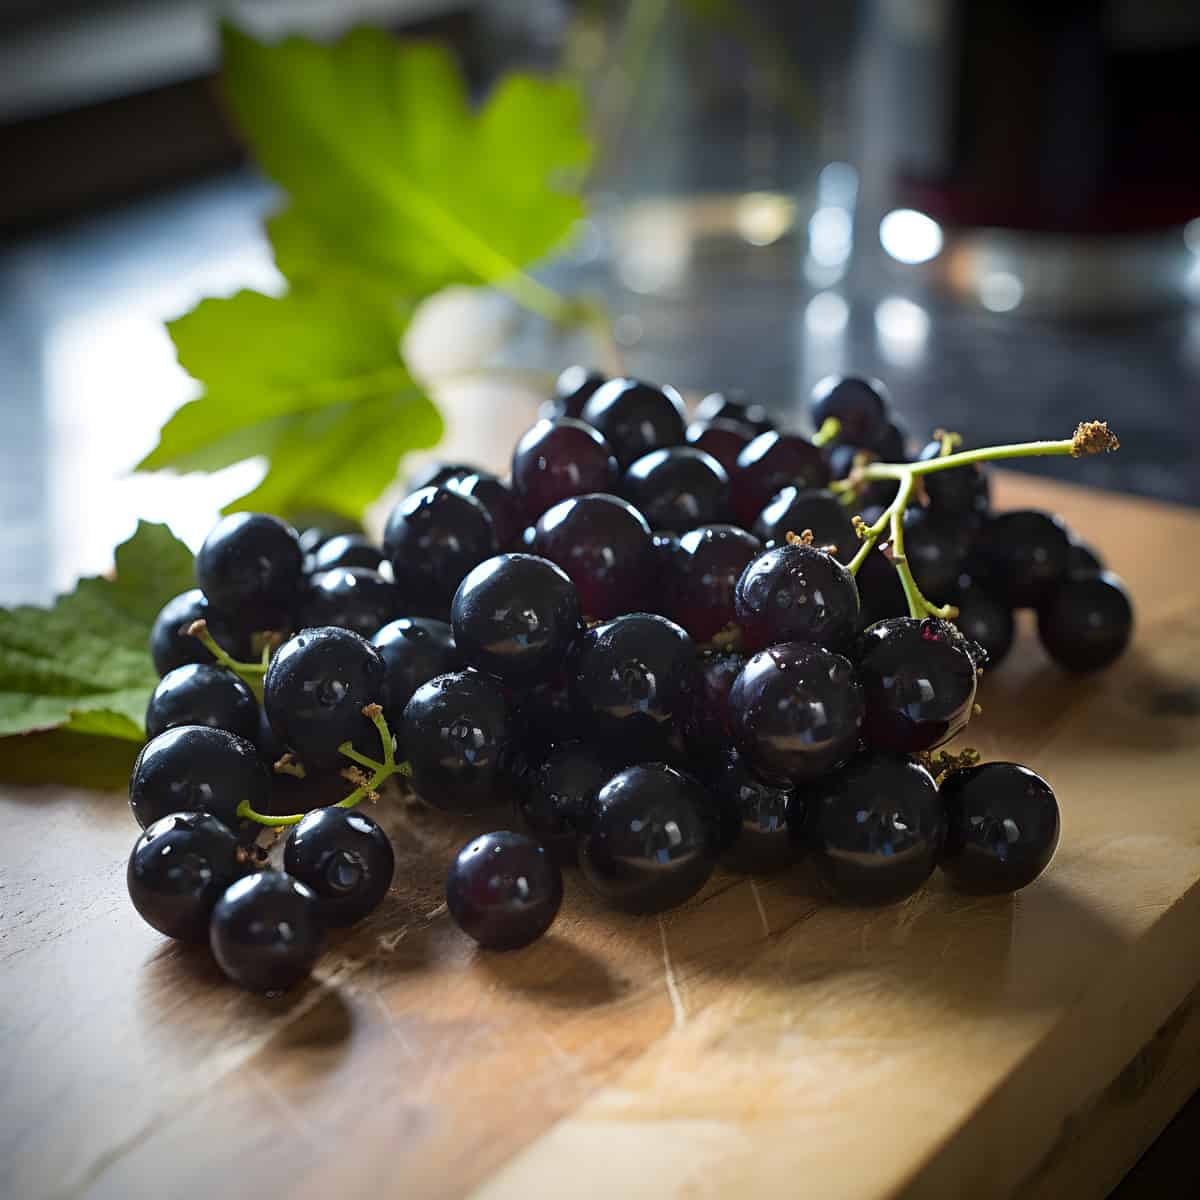 Black Currants on a kitchen counter